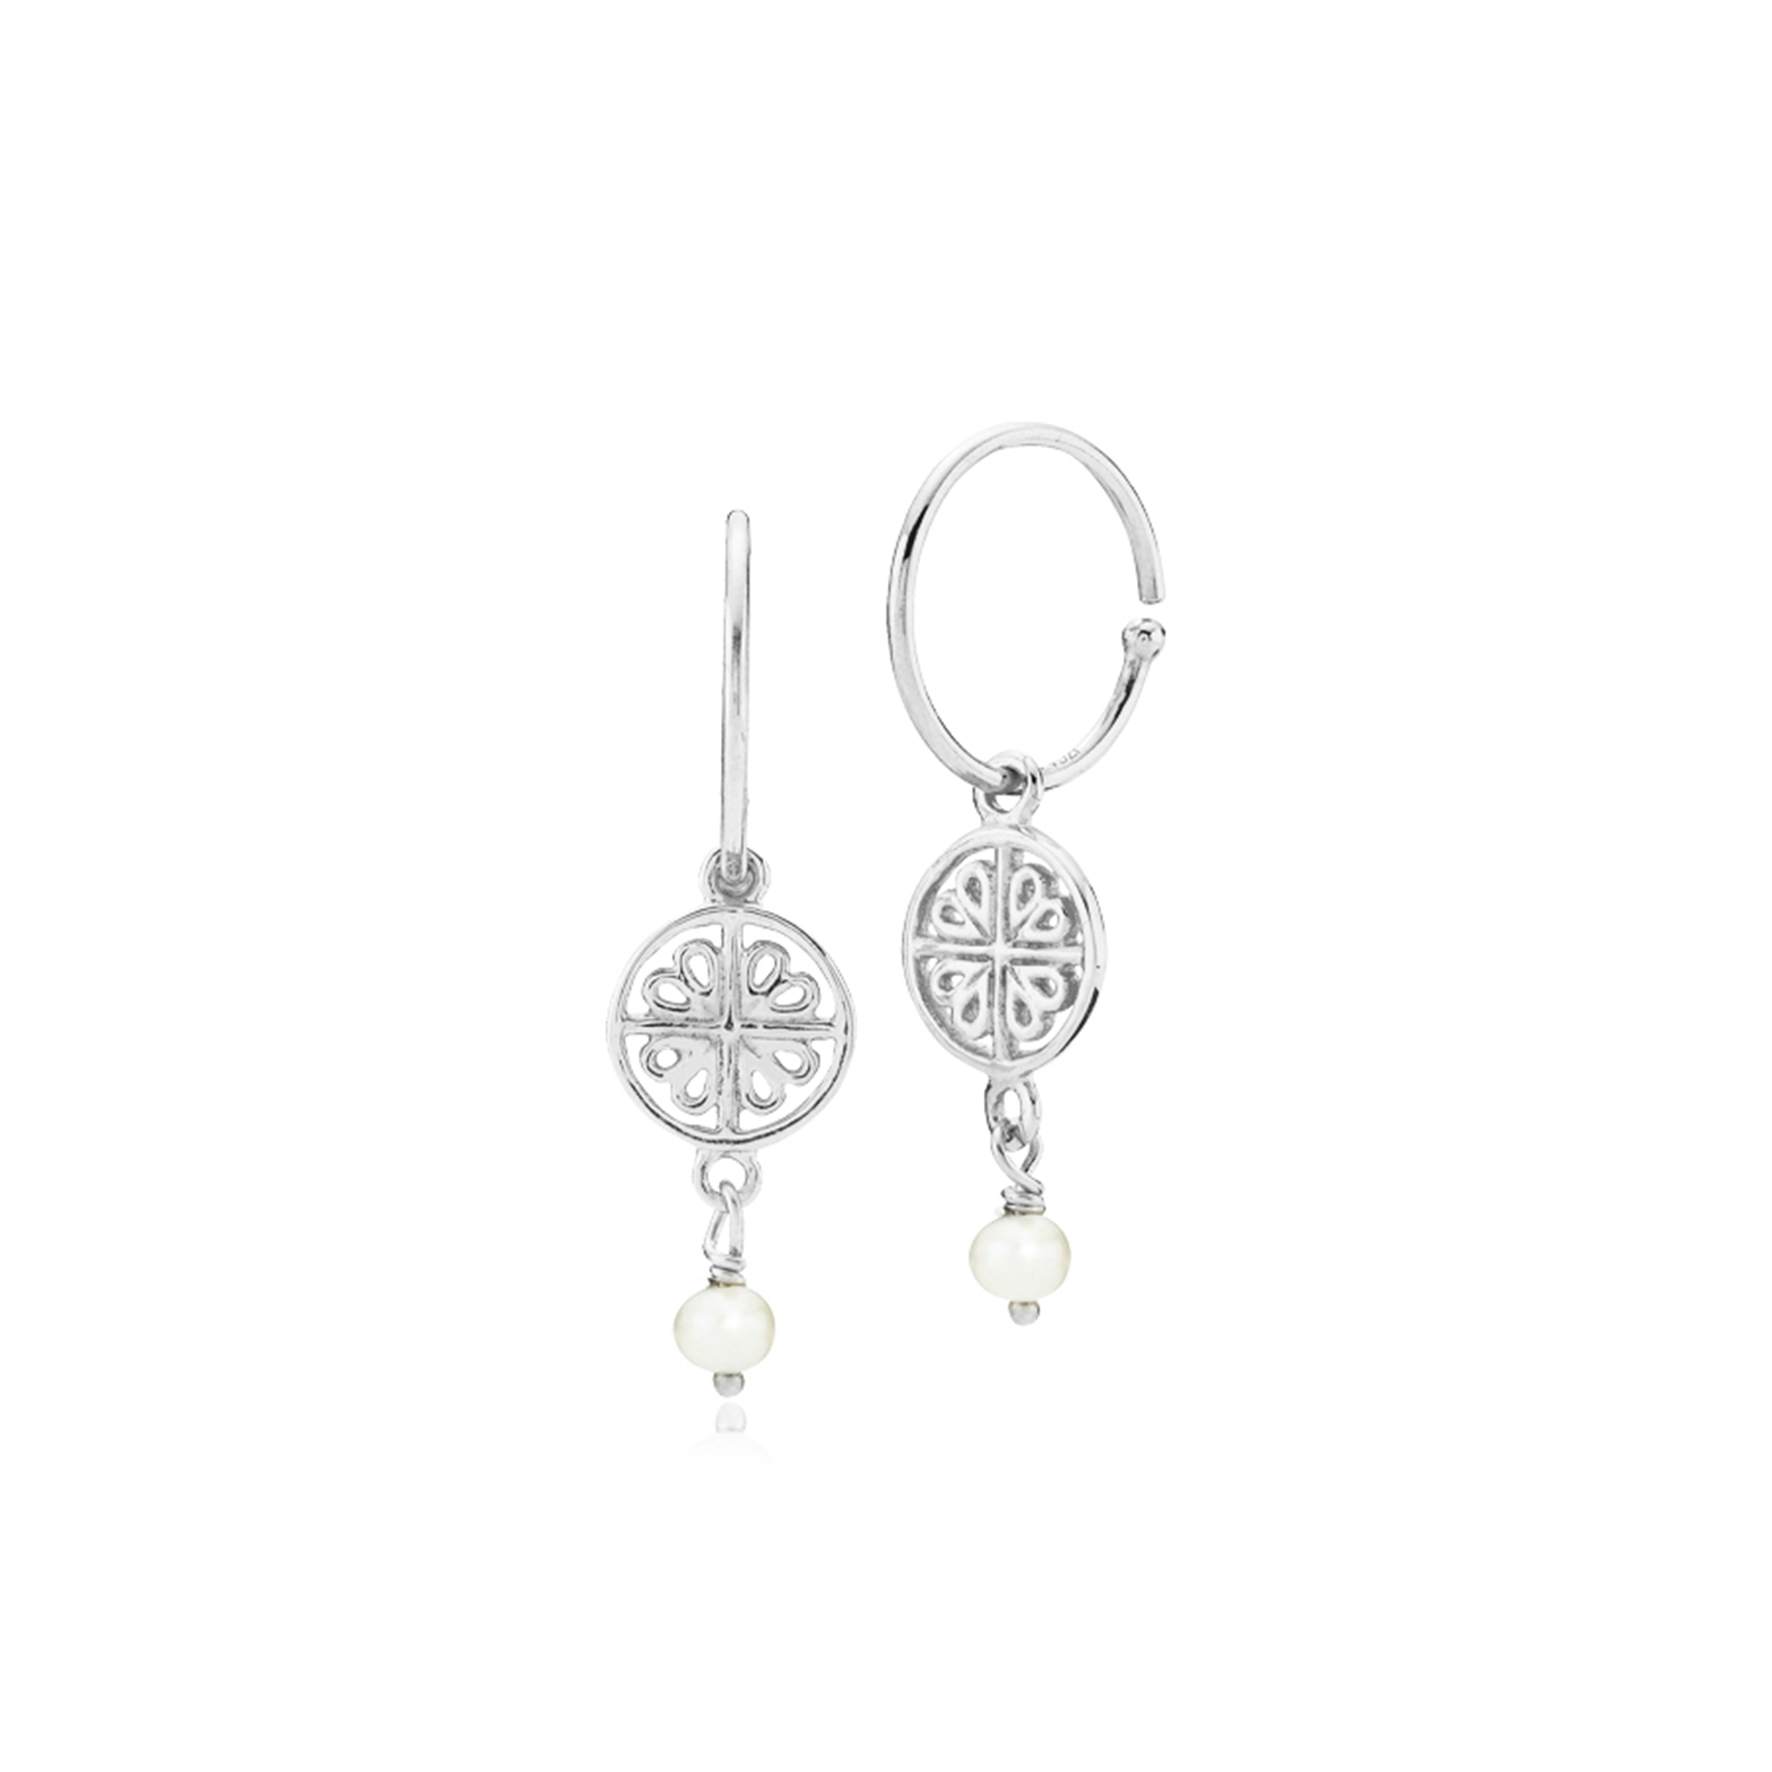 Balance Creol Earrings With Pearl fra Sistie i Sølv Sterling 925